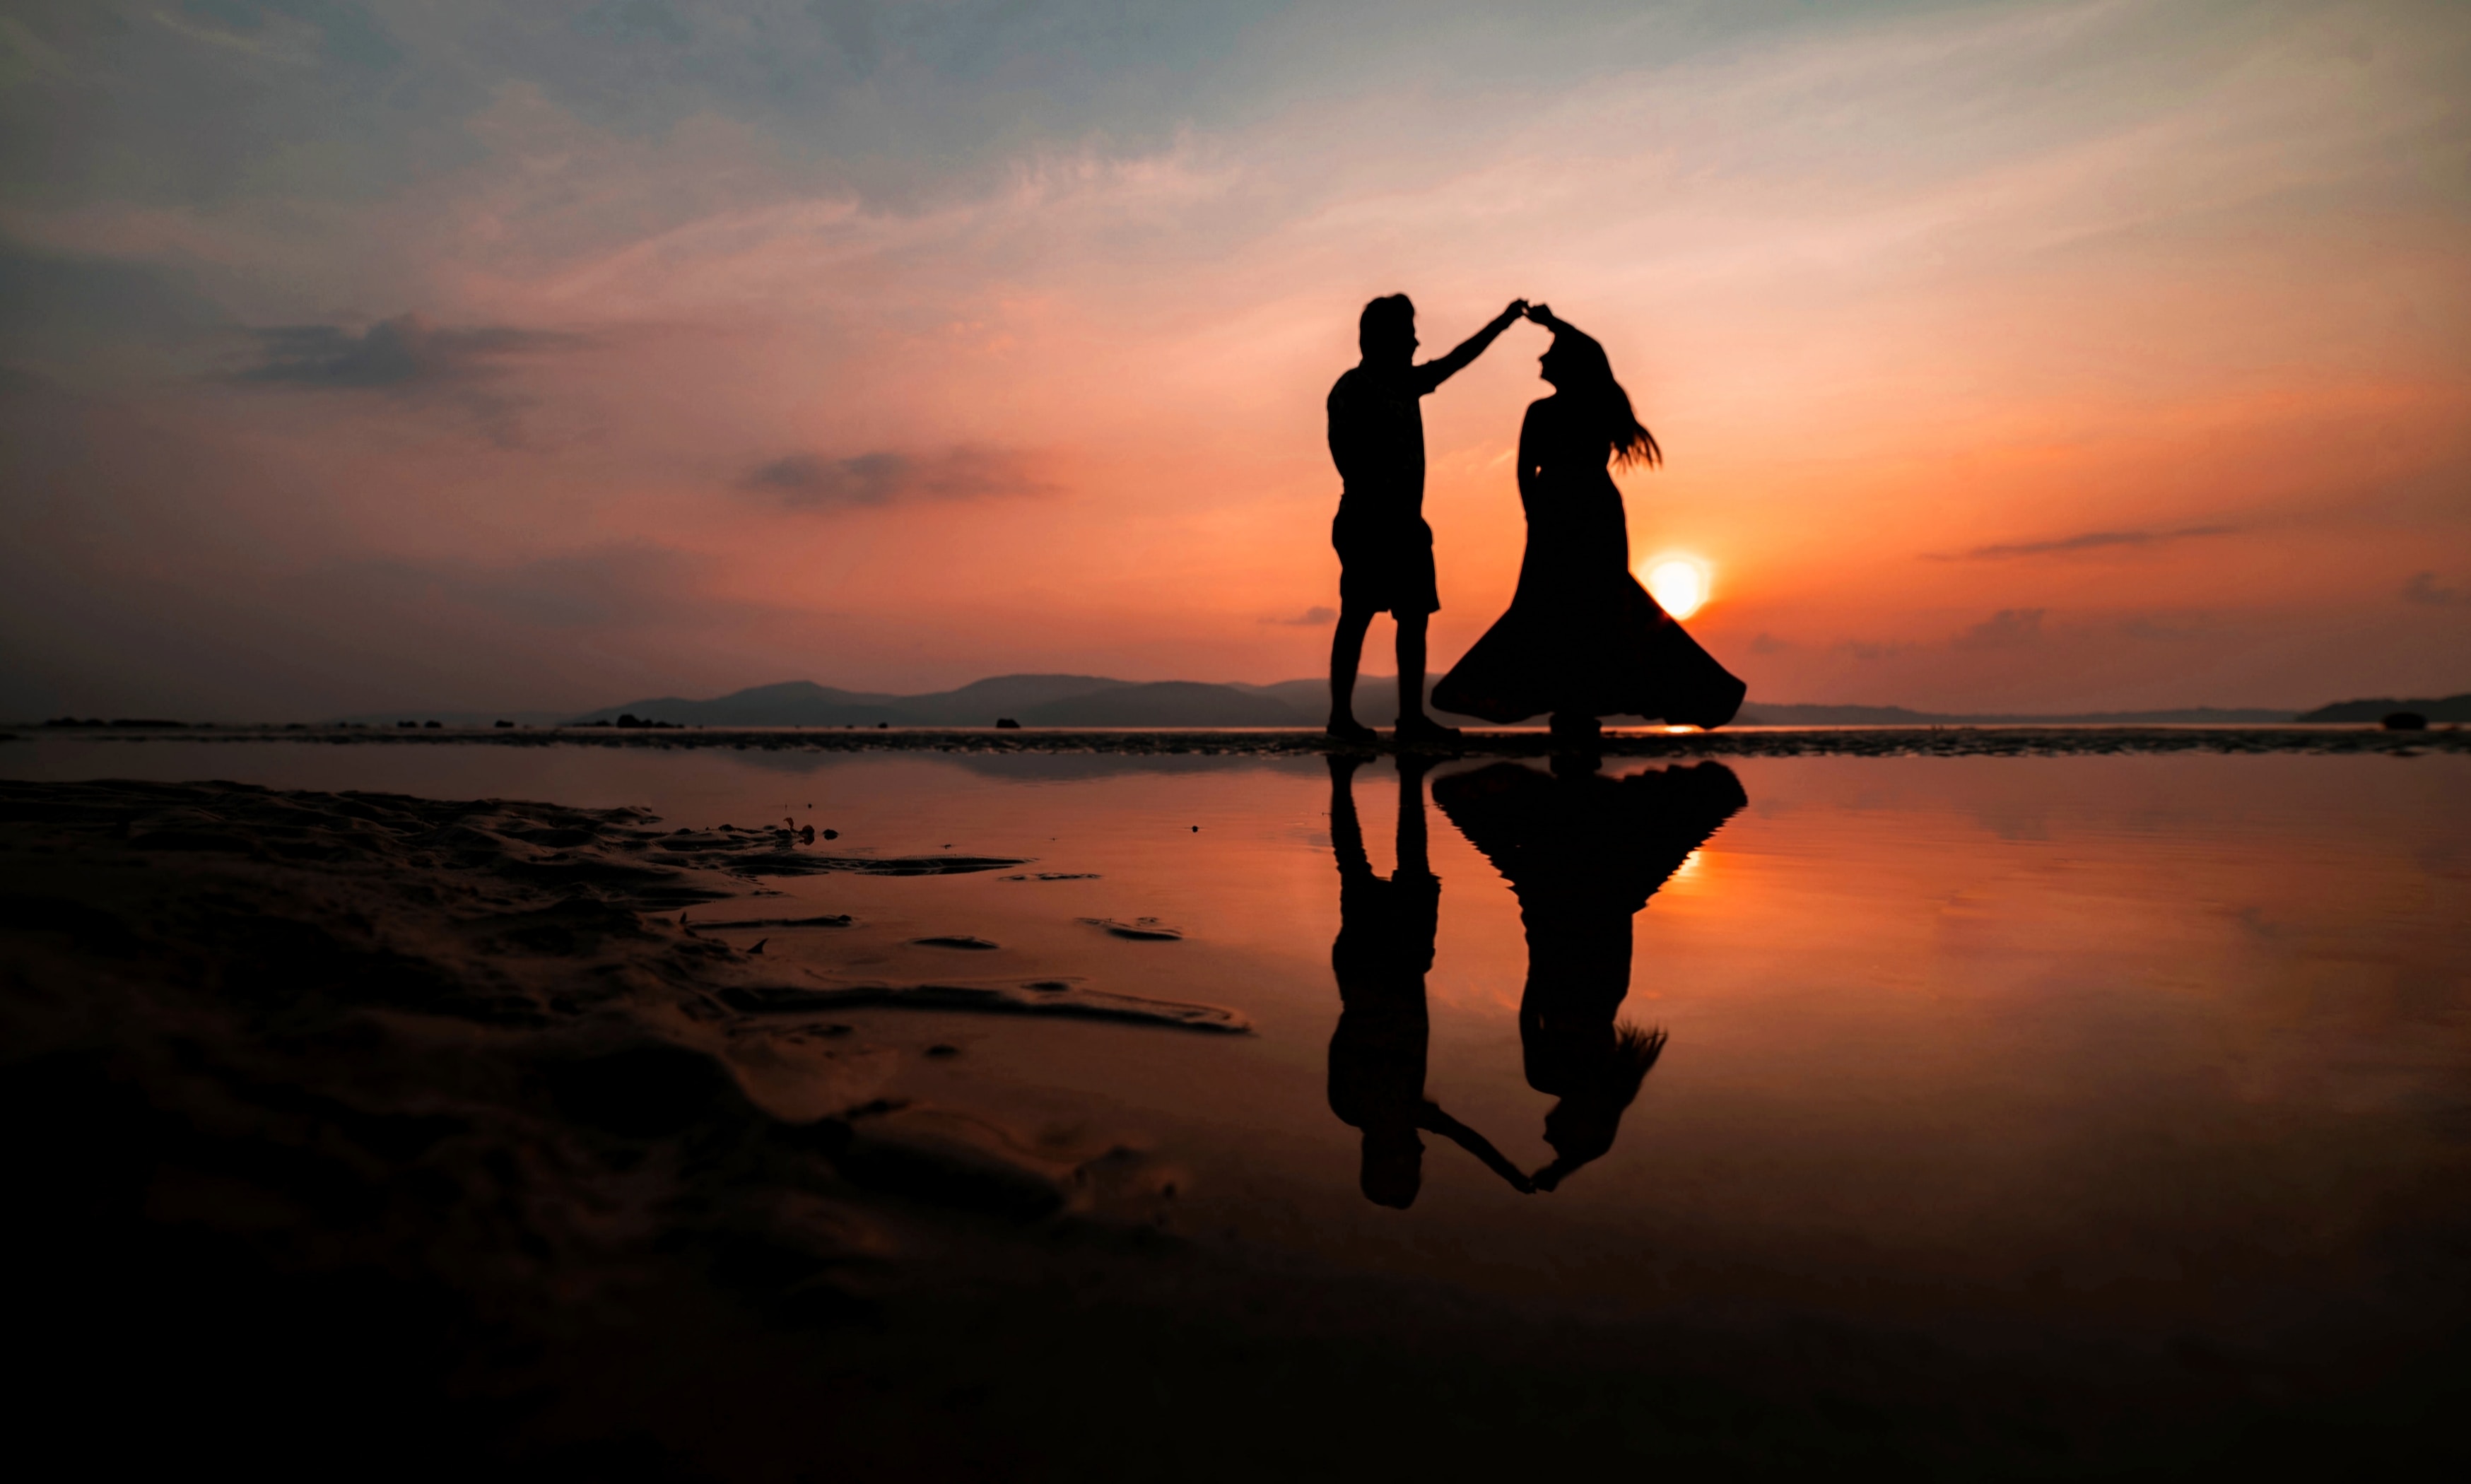 A couple dancing on the beach at sunset. | Source: Unsplash